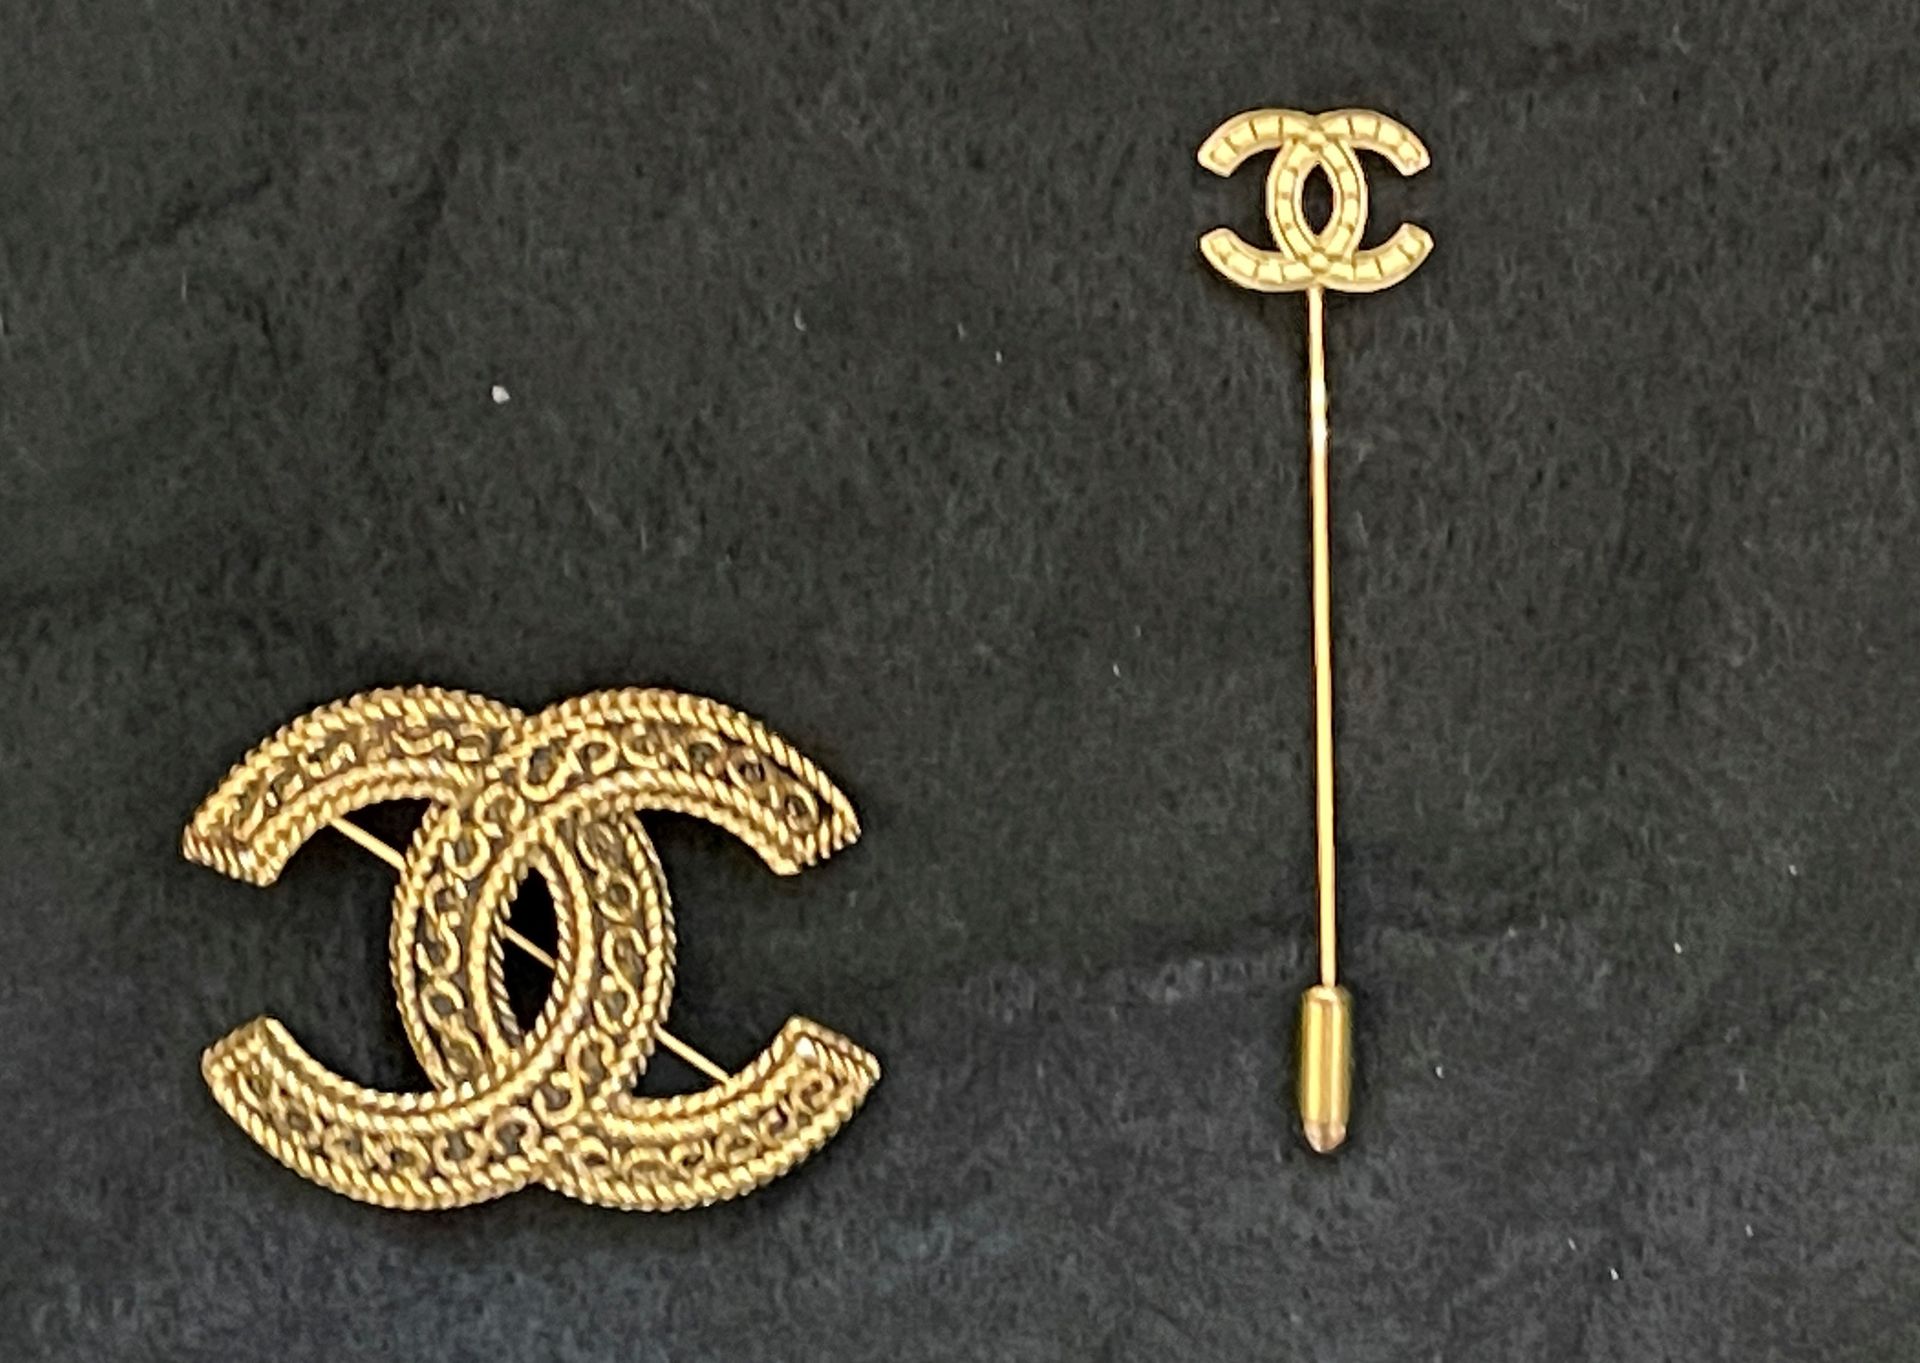 Null CHANEL. Double C brooch in gilt metal on a black background.

Signed and nu&hellip;